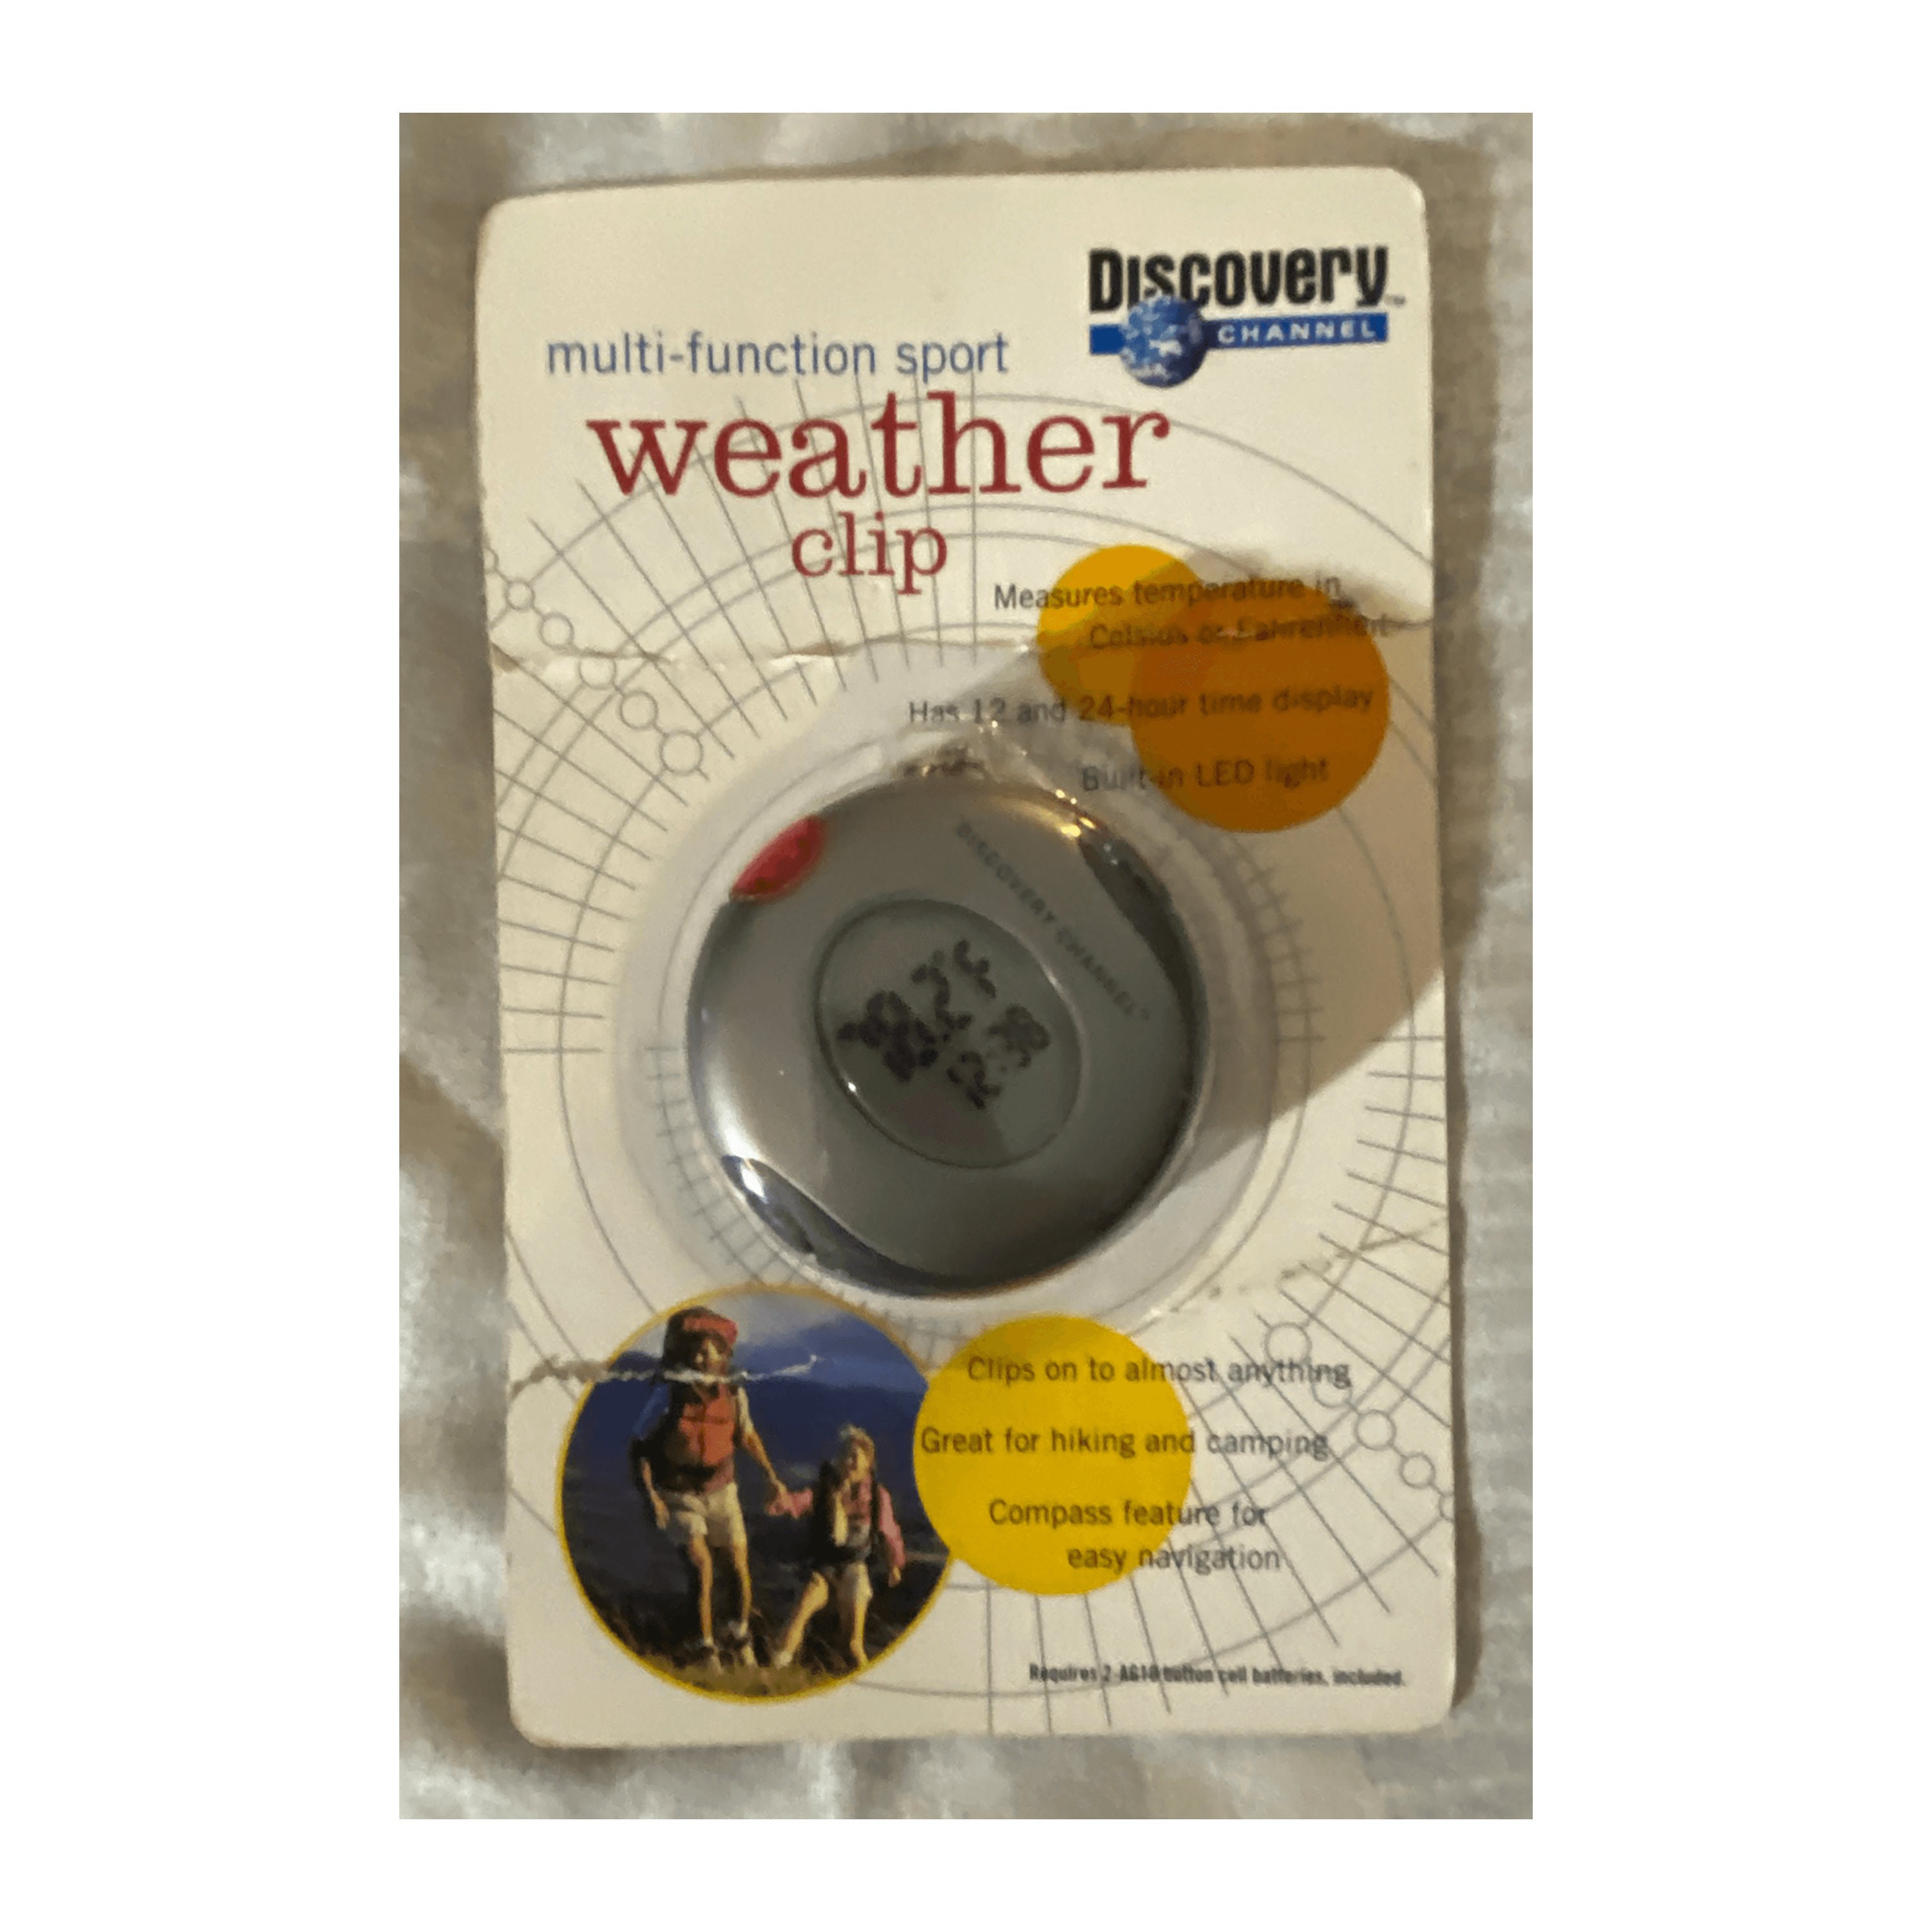 NEW: Weather Clip Multi-function by Discovery Channel 